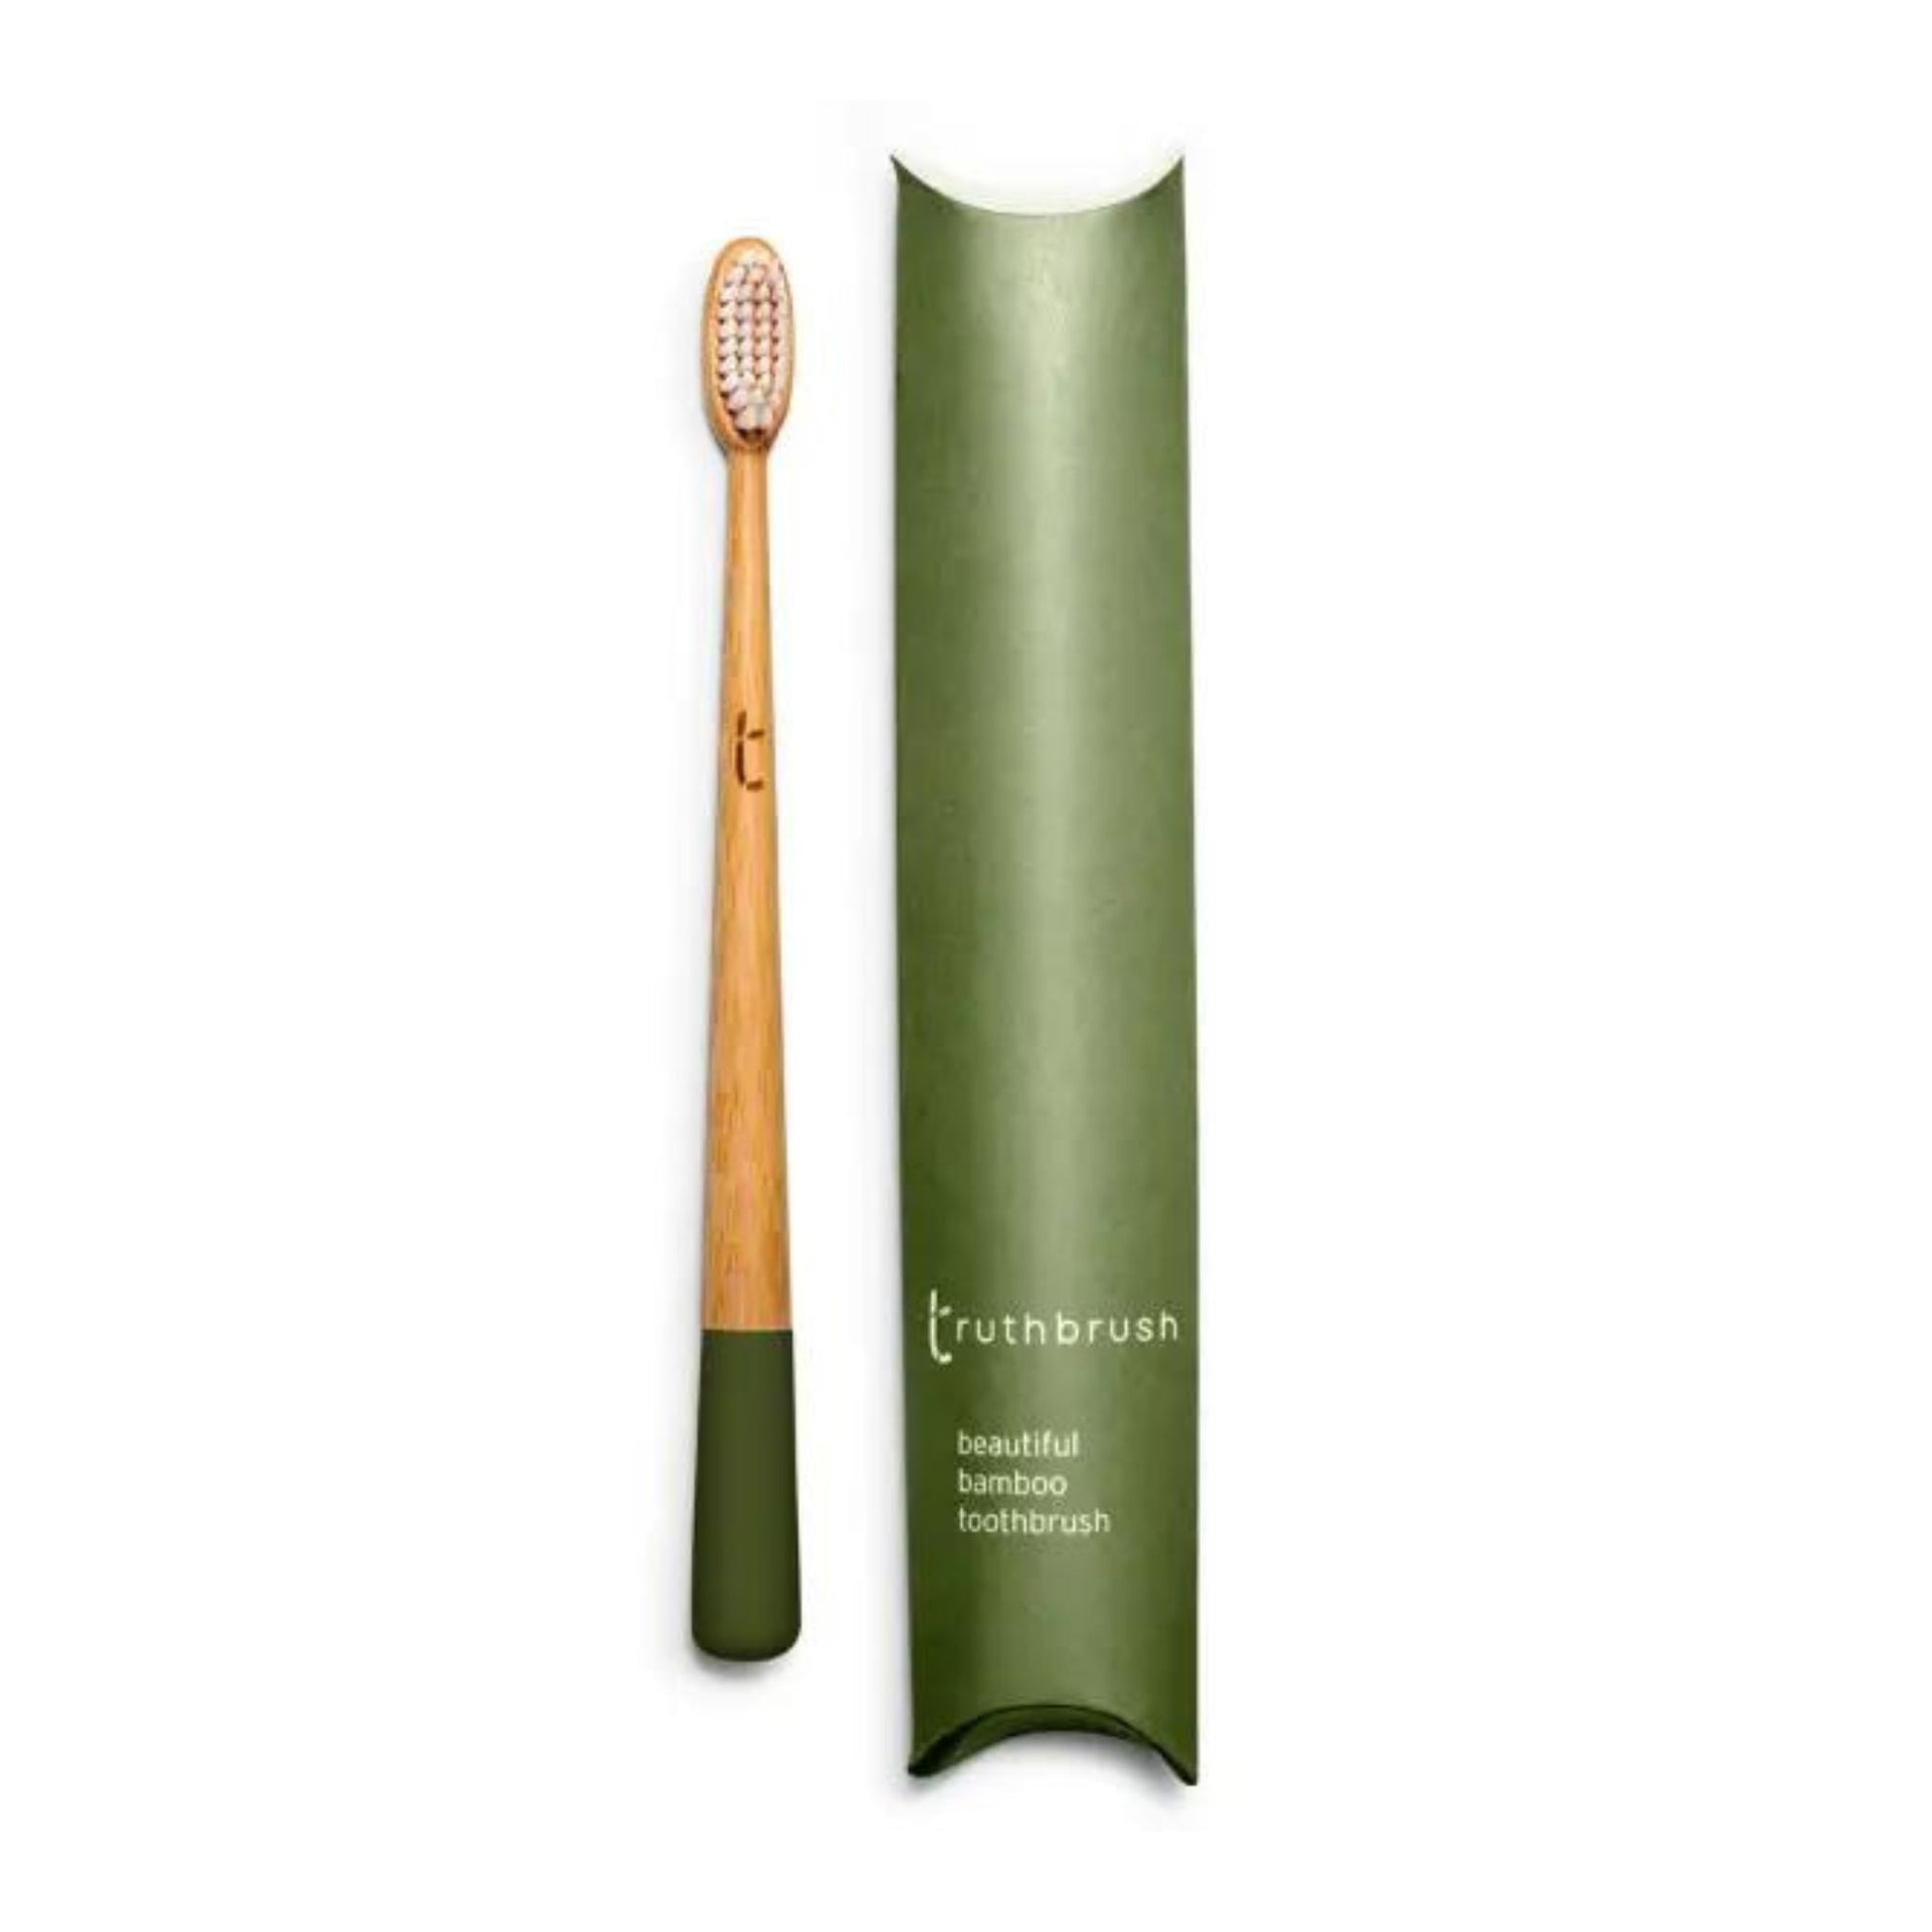 Bamboo toothbrush with Medium plant-based bristles in green